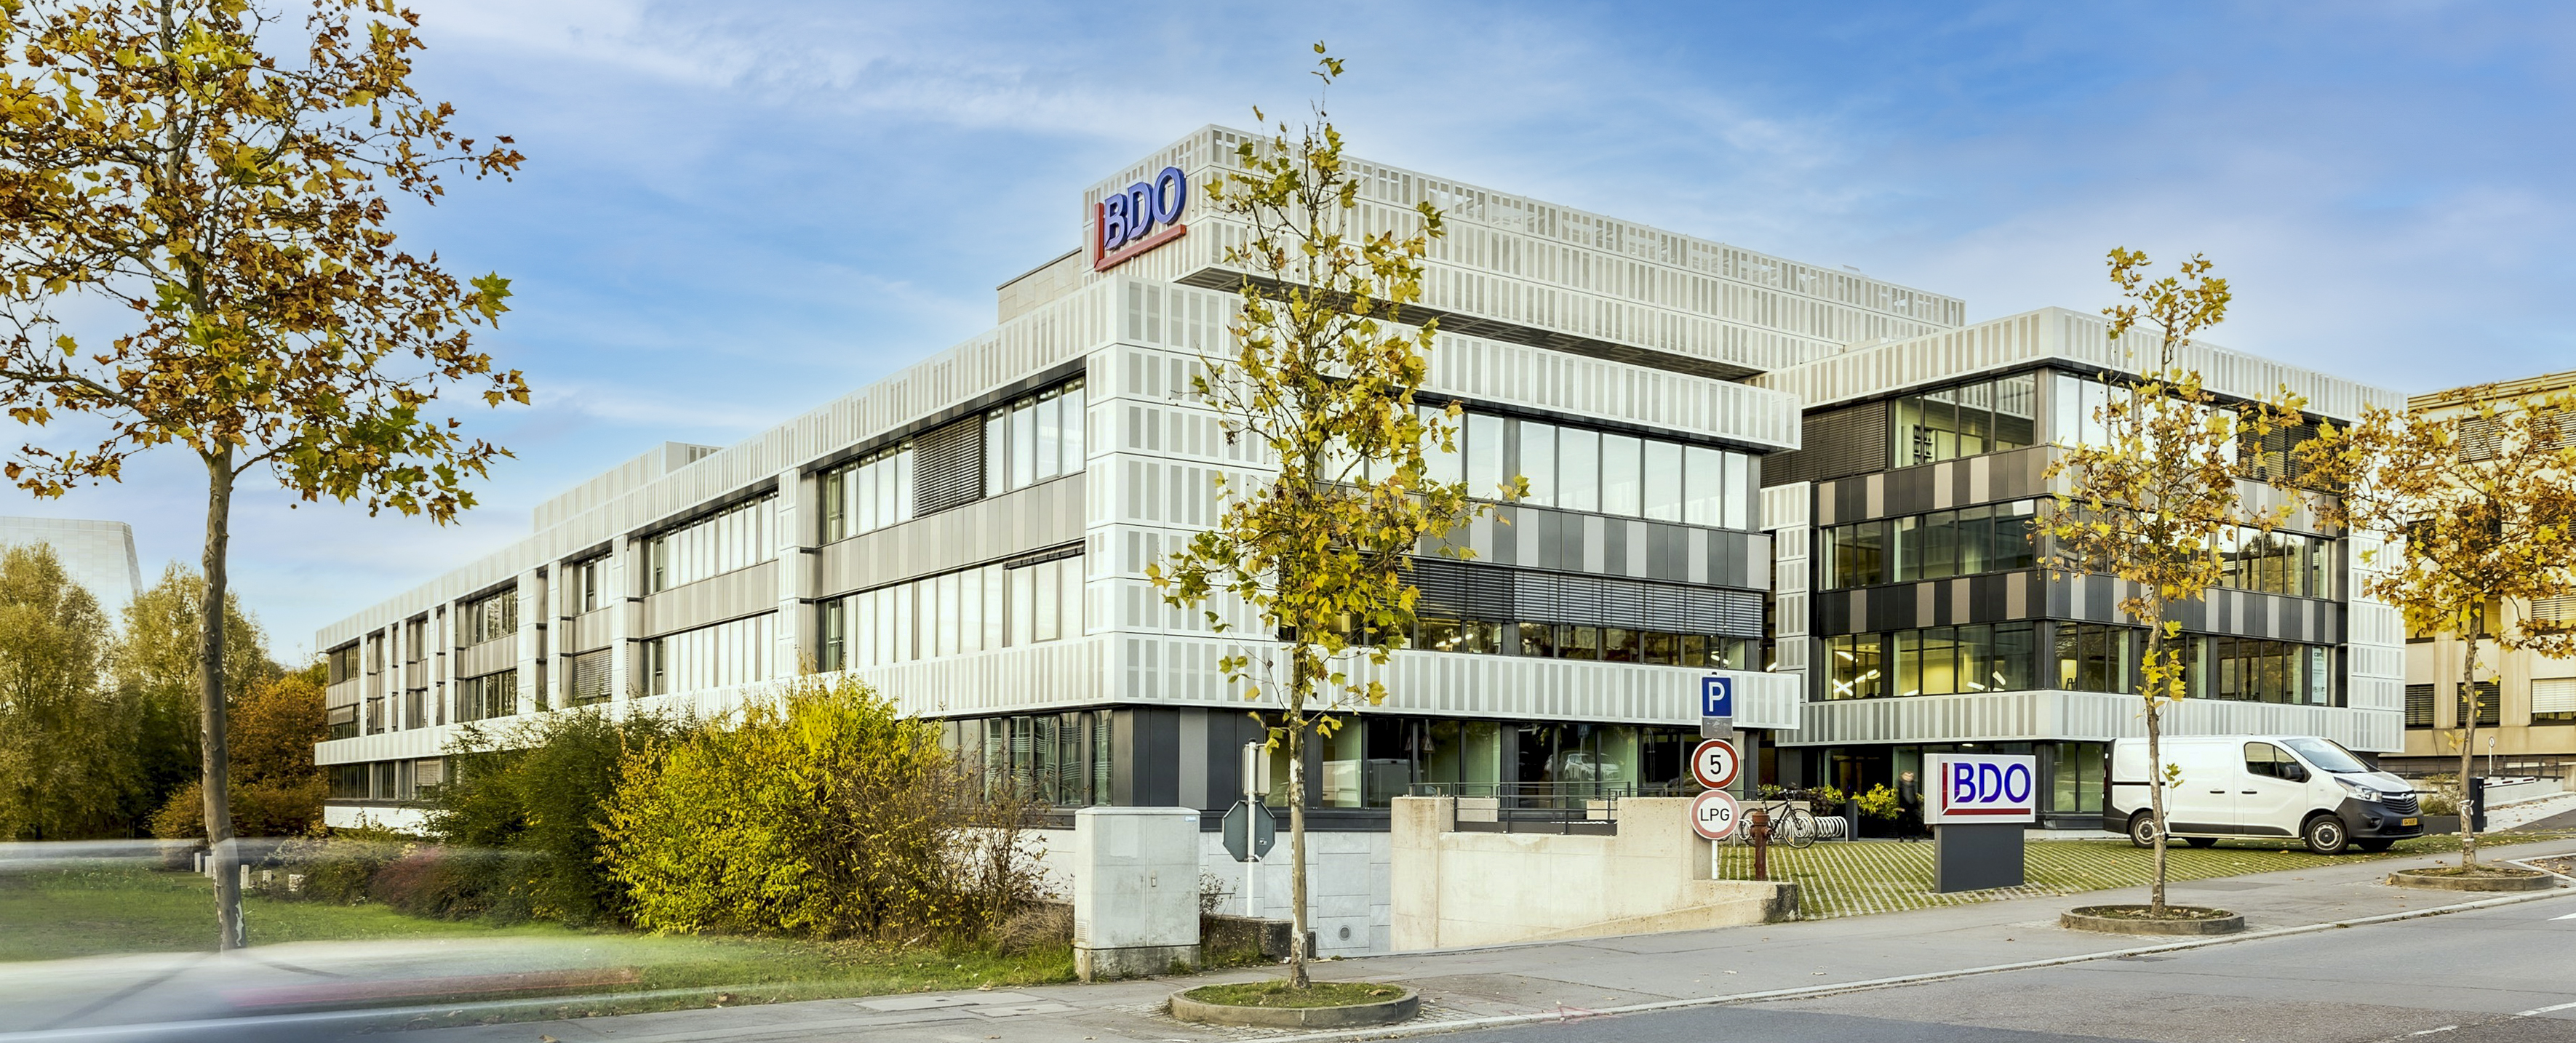 BDO building in Luxembourg